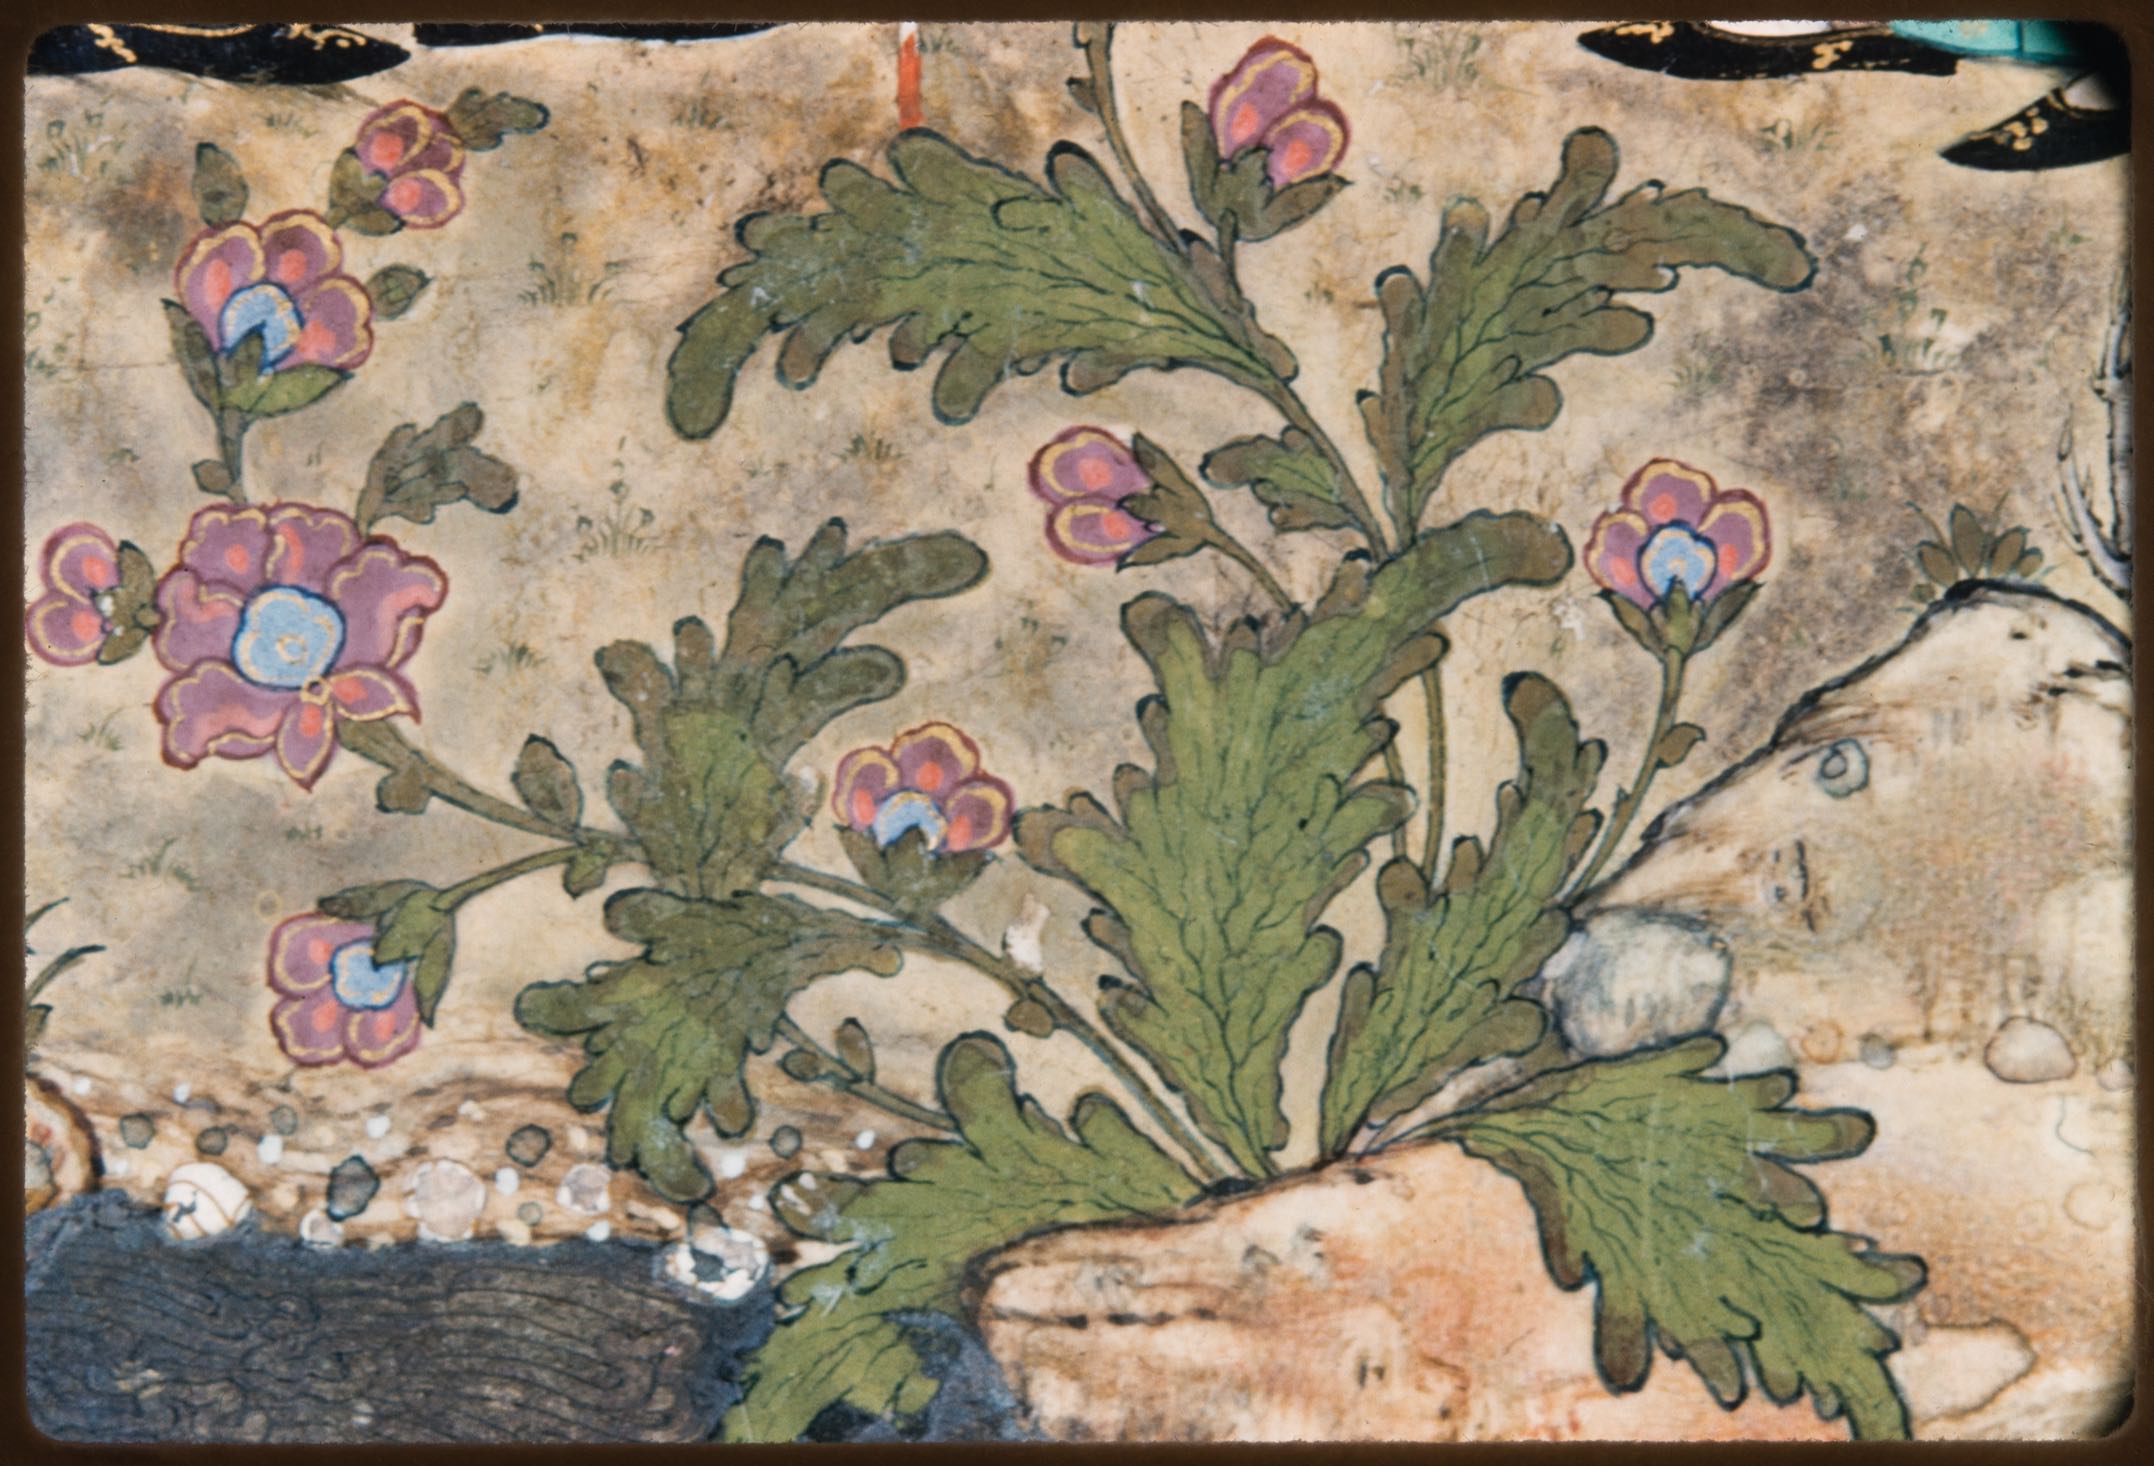 Detail of plants from Rudaba's Maids Meet Zal's Page at the River (Tehran Museum of Contemporary Art), f. 70v from the Houghton Shahnama